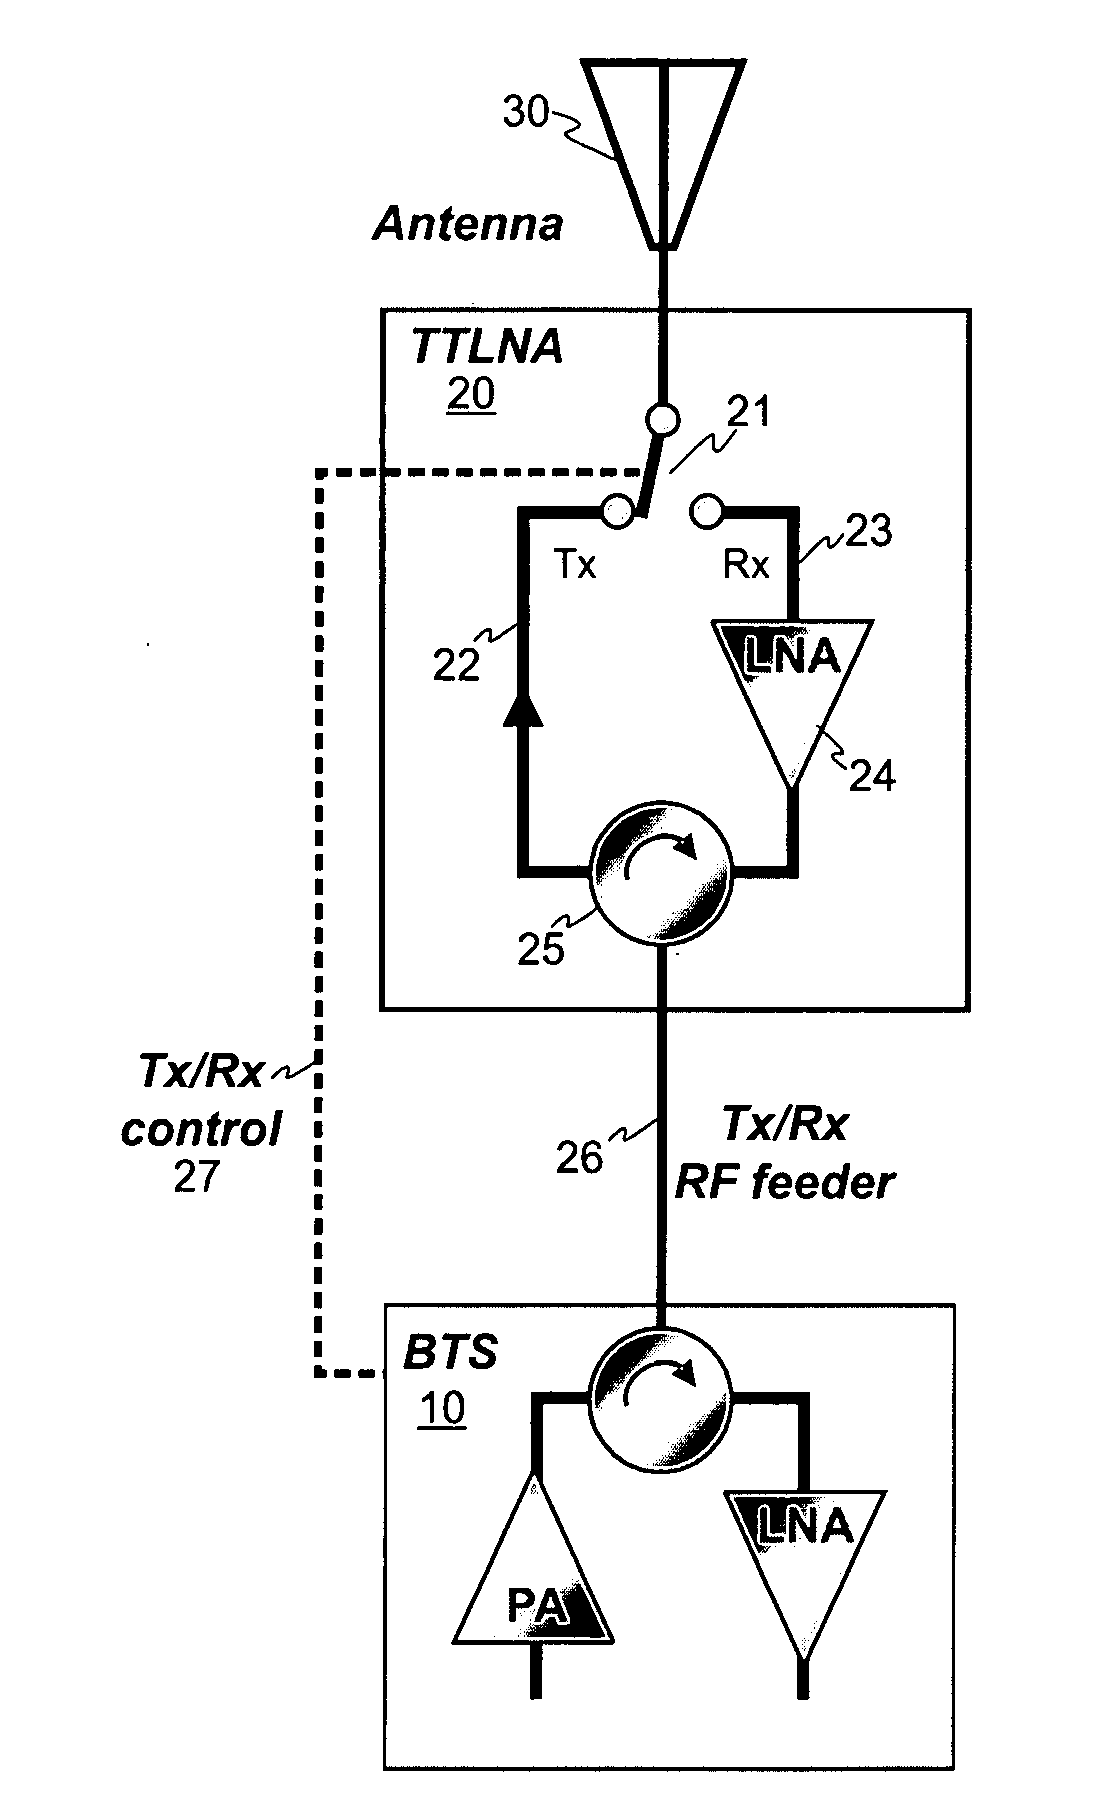 Stand-alone low noise amplifier